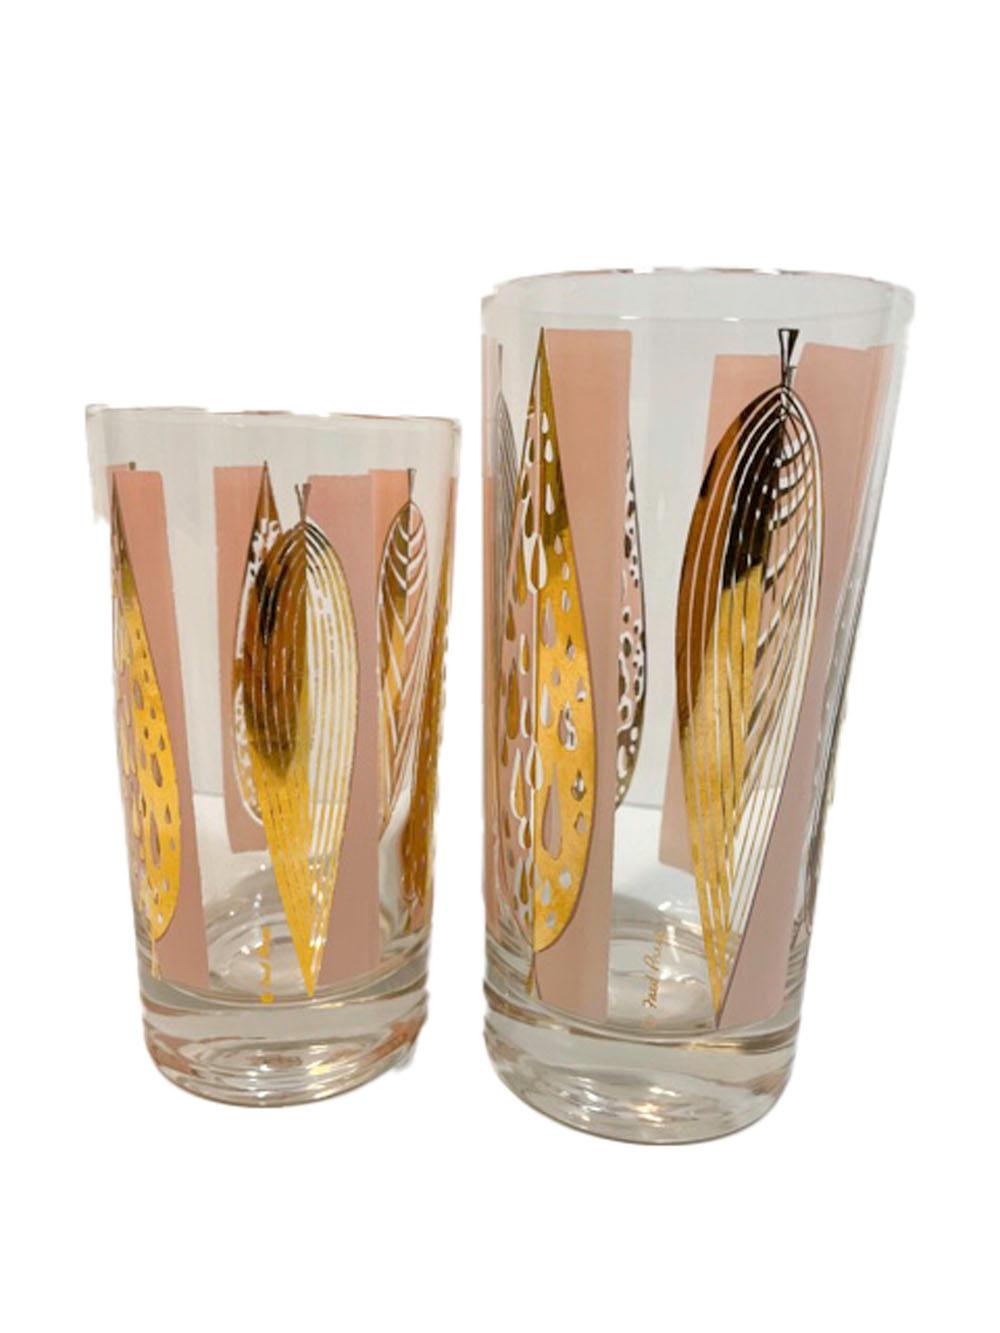 American Vintage Fred Press 16 Piece Cocktail Set in Pink with Gold Stylized Leaves